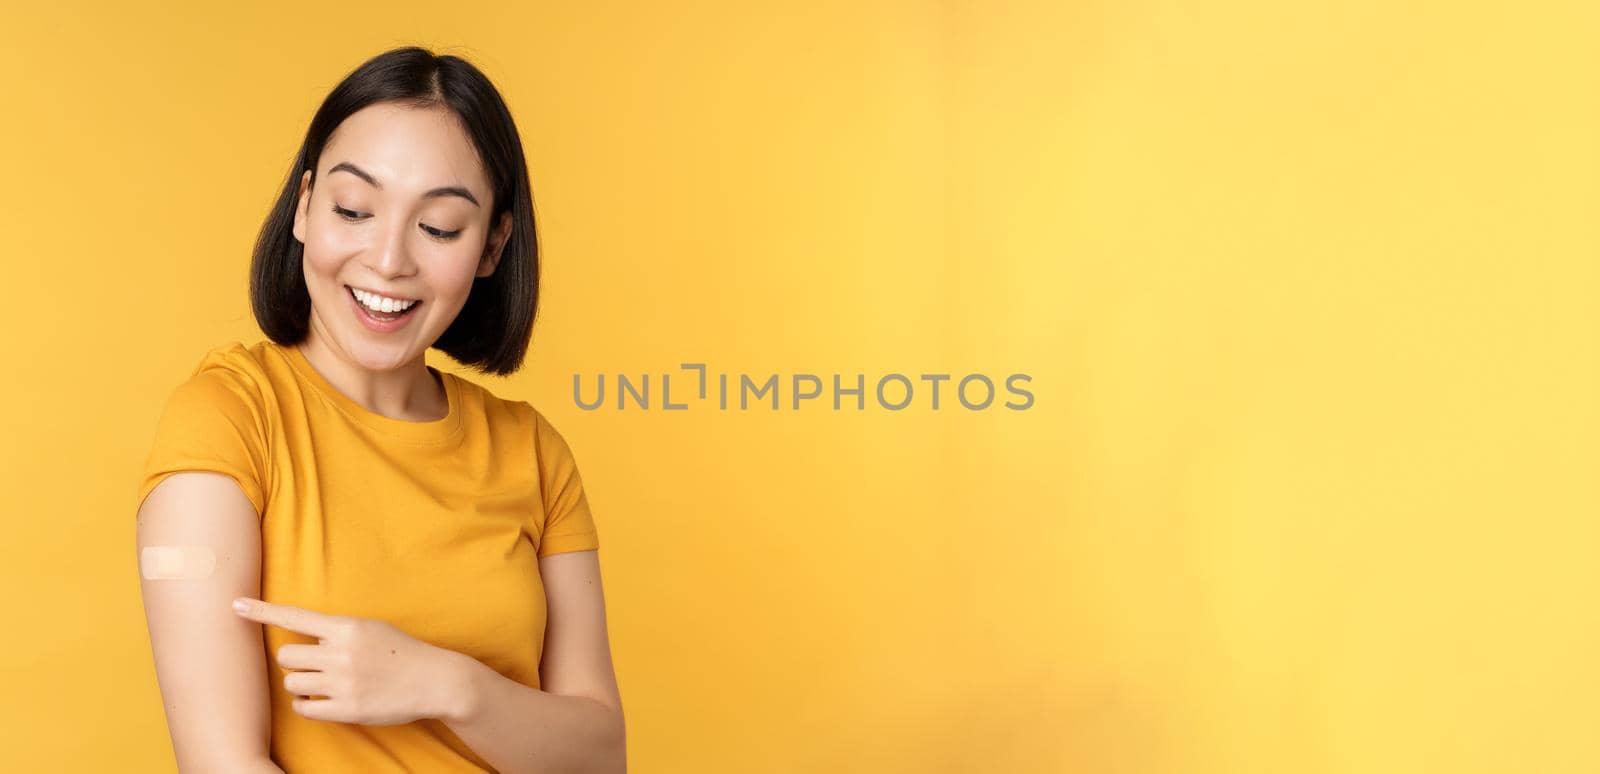 Vaccination and covid-19 pandemic concept. Happy and healthy asian girl pointing at her shoulder with band aid after vaccinating from coronavirus, yellow background.